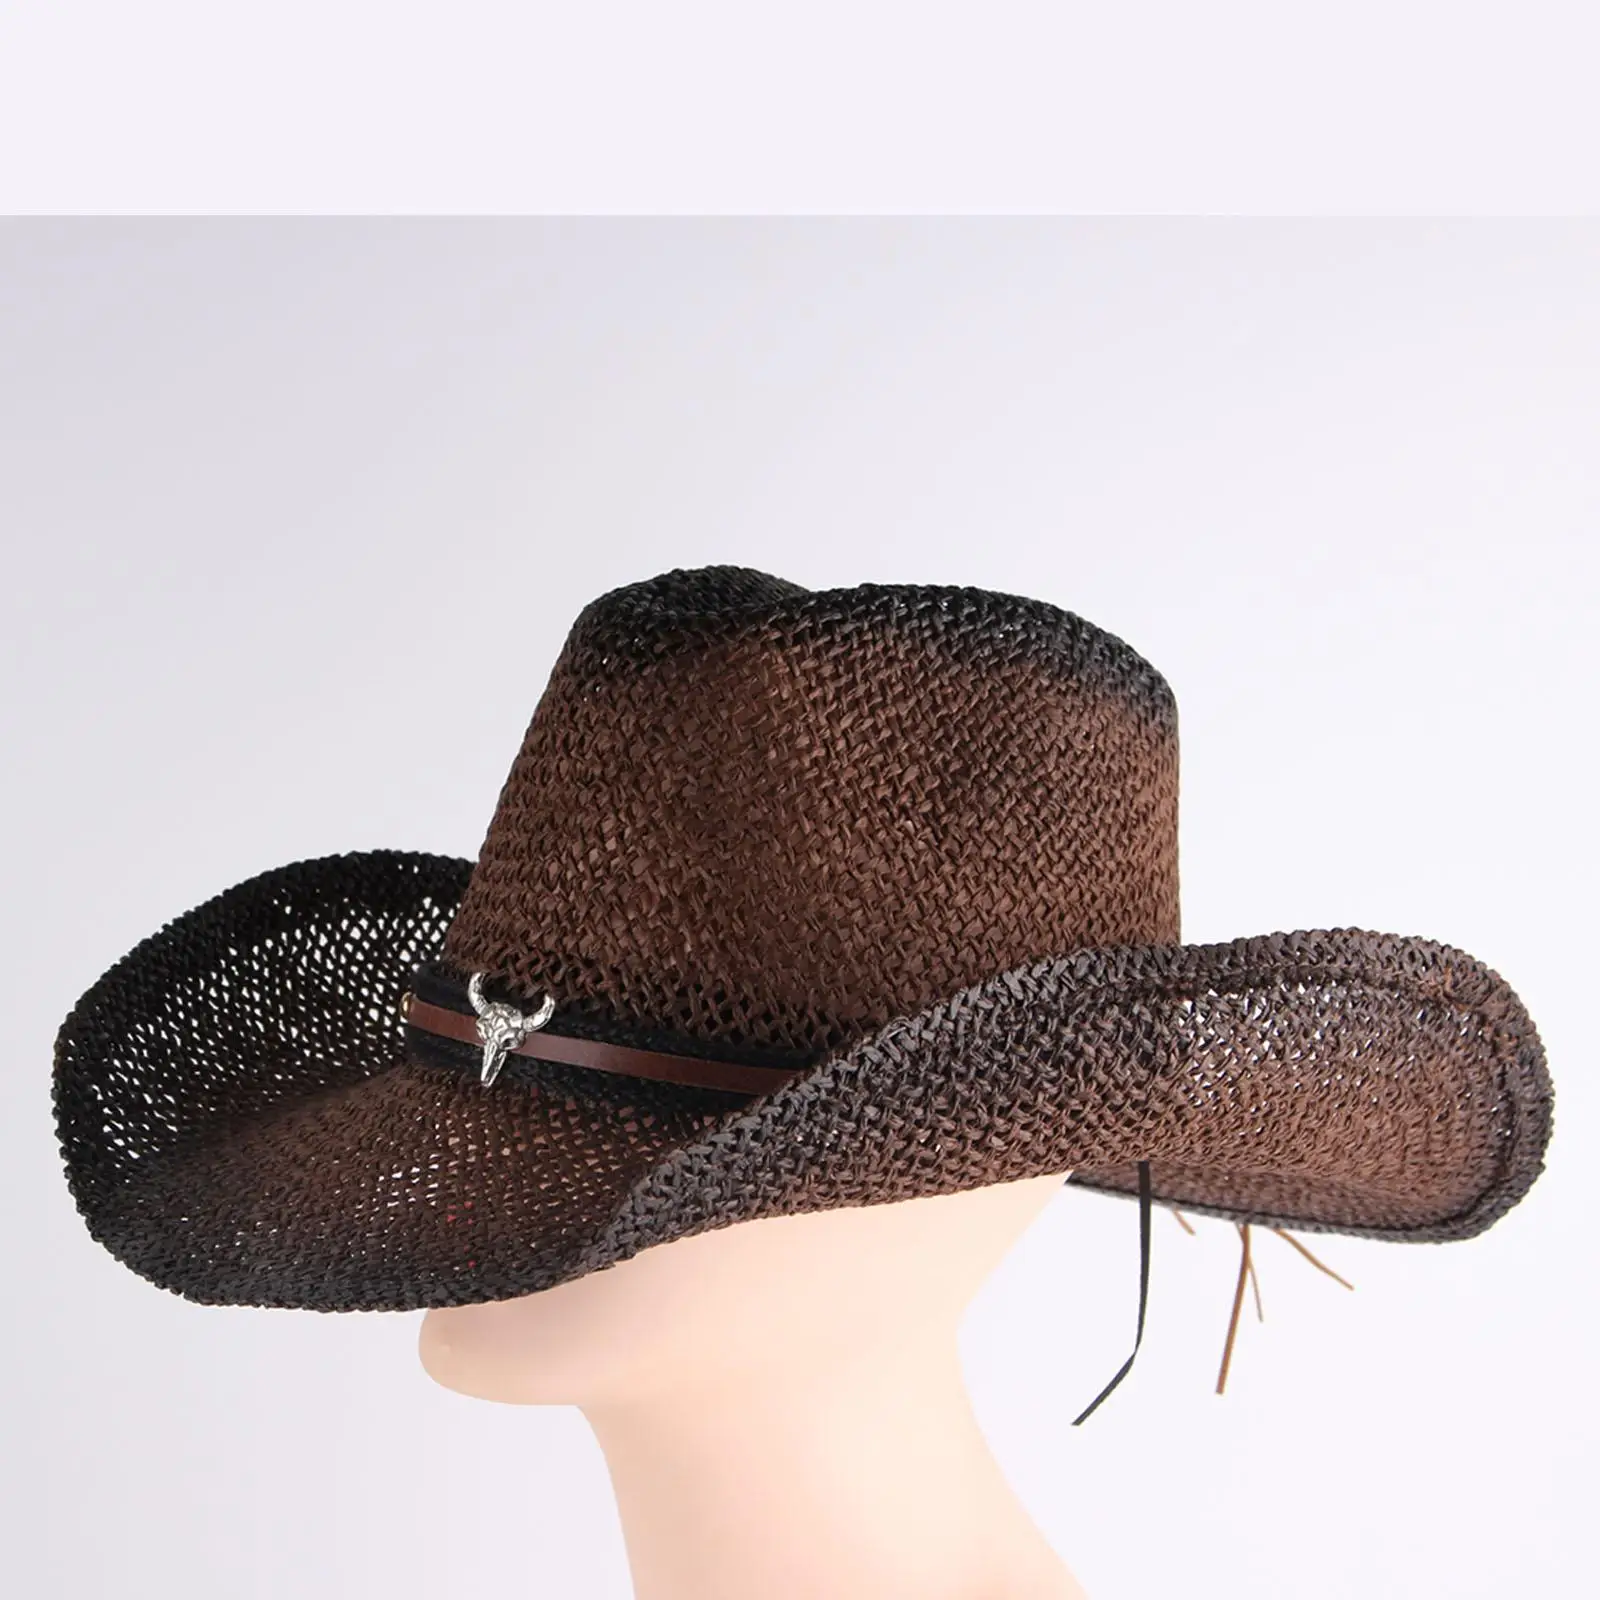 Vintage Straw Cowboy Hat, Sombreros Vagueros Shapeable Classic Hat Western Cowboy Hats for Rodeo Horseback Riding Outdoor Beach